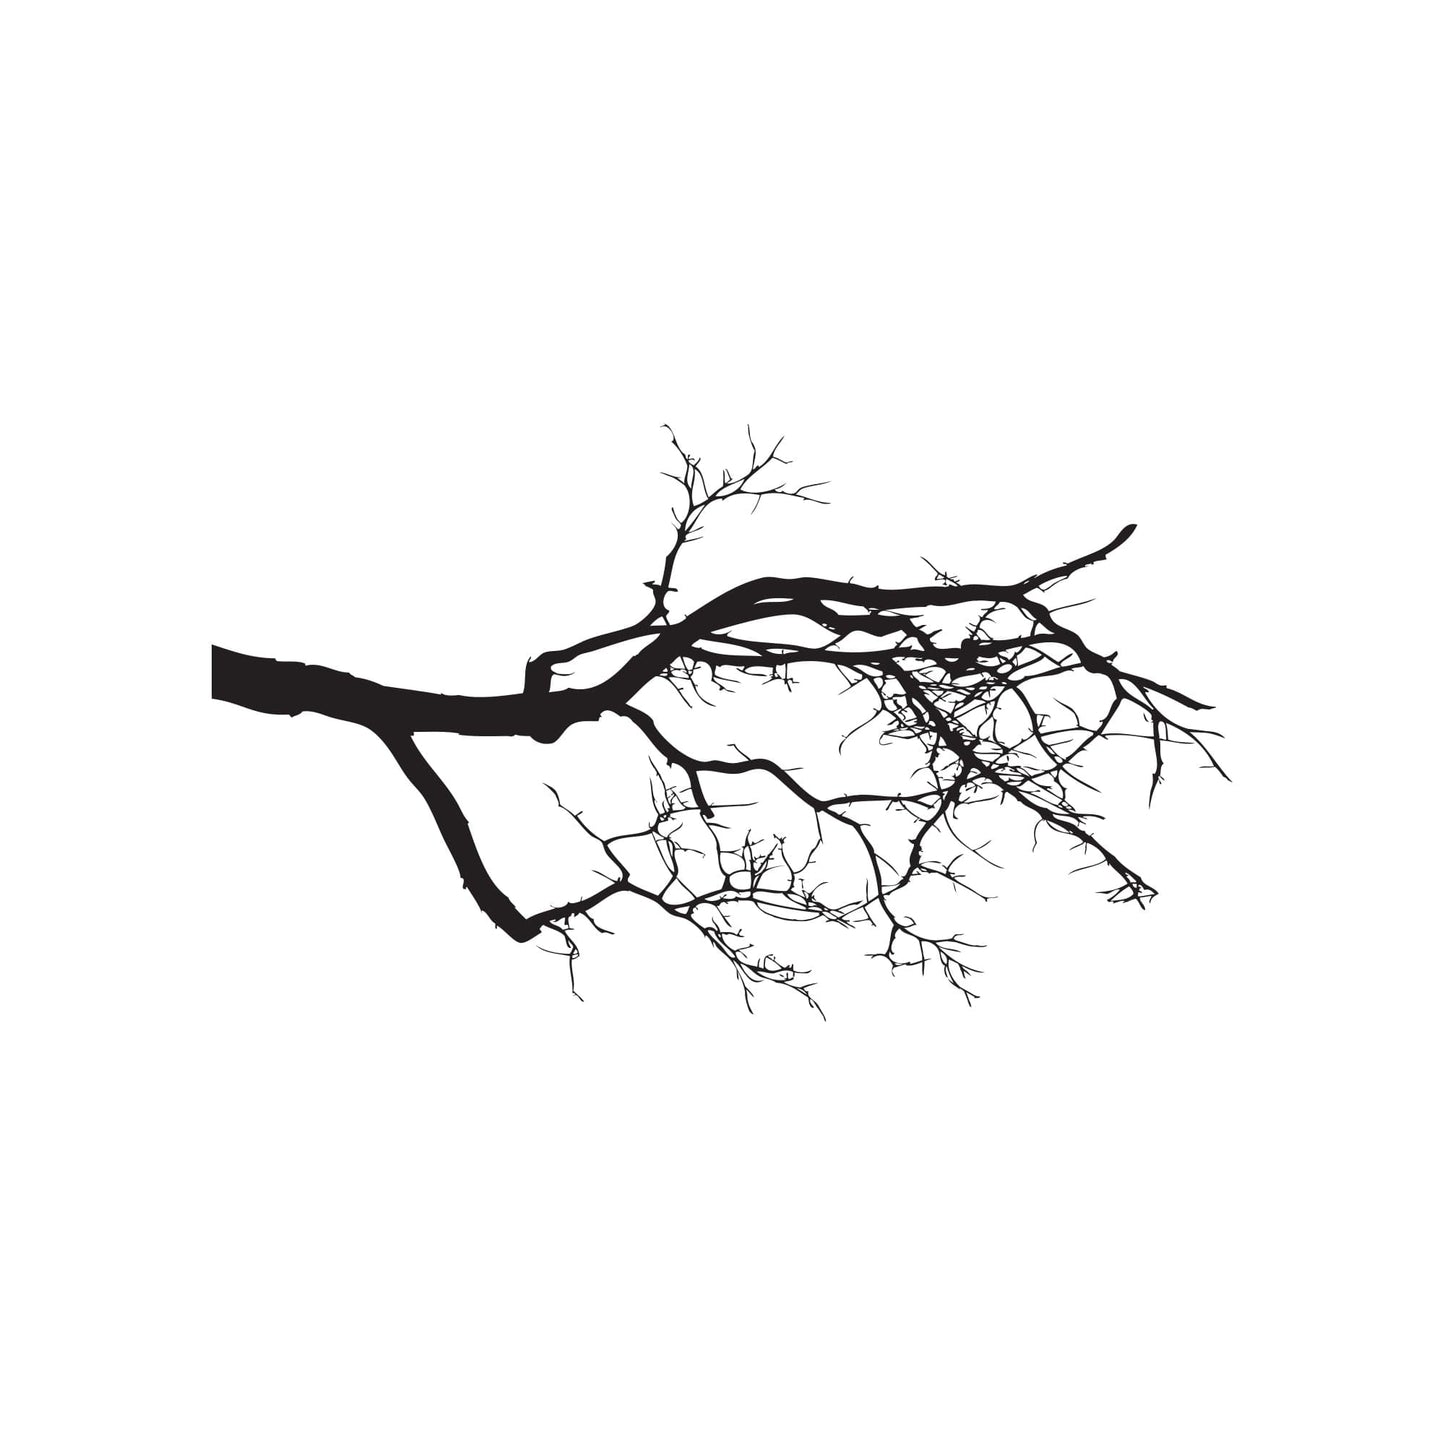 Tree Top Branches Wall Decal Sticker. #780